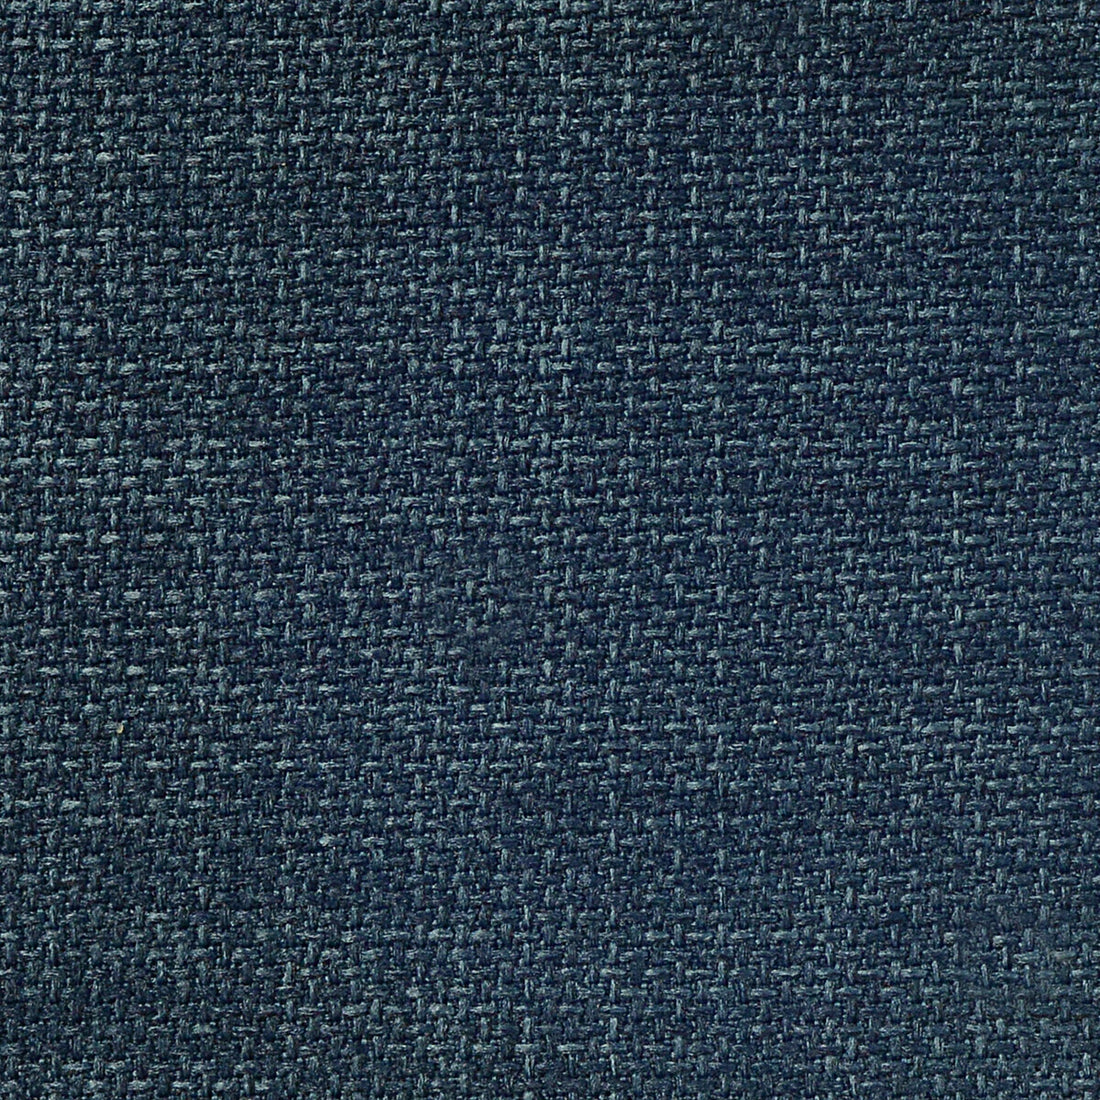 Kravet Contract fabric in 35182-50 color - pattern 35182.50.0 - by Kravet Contract